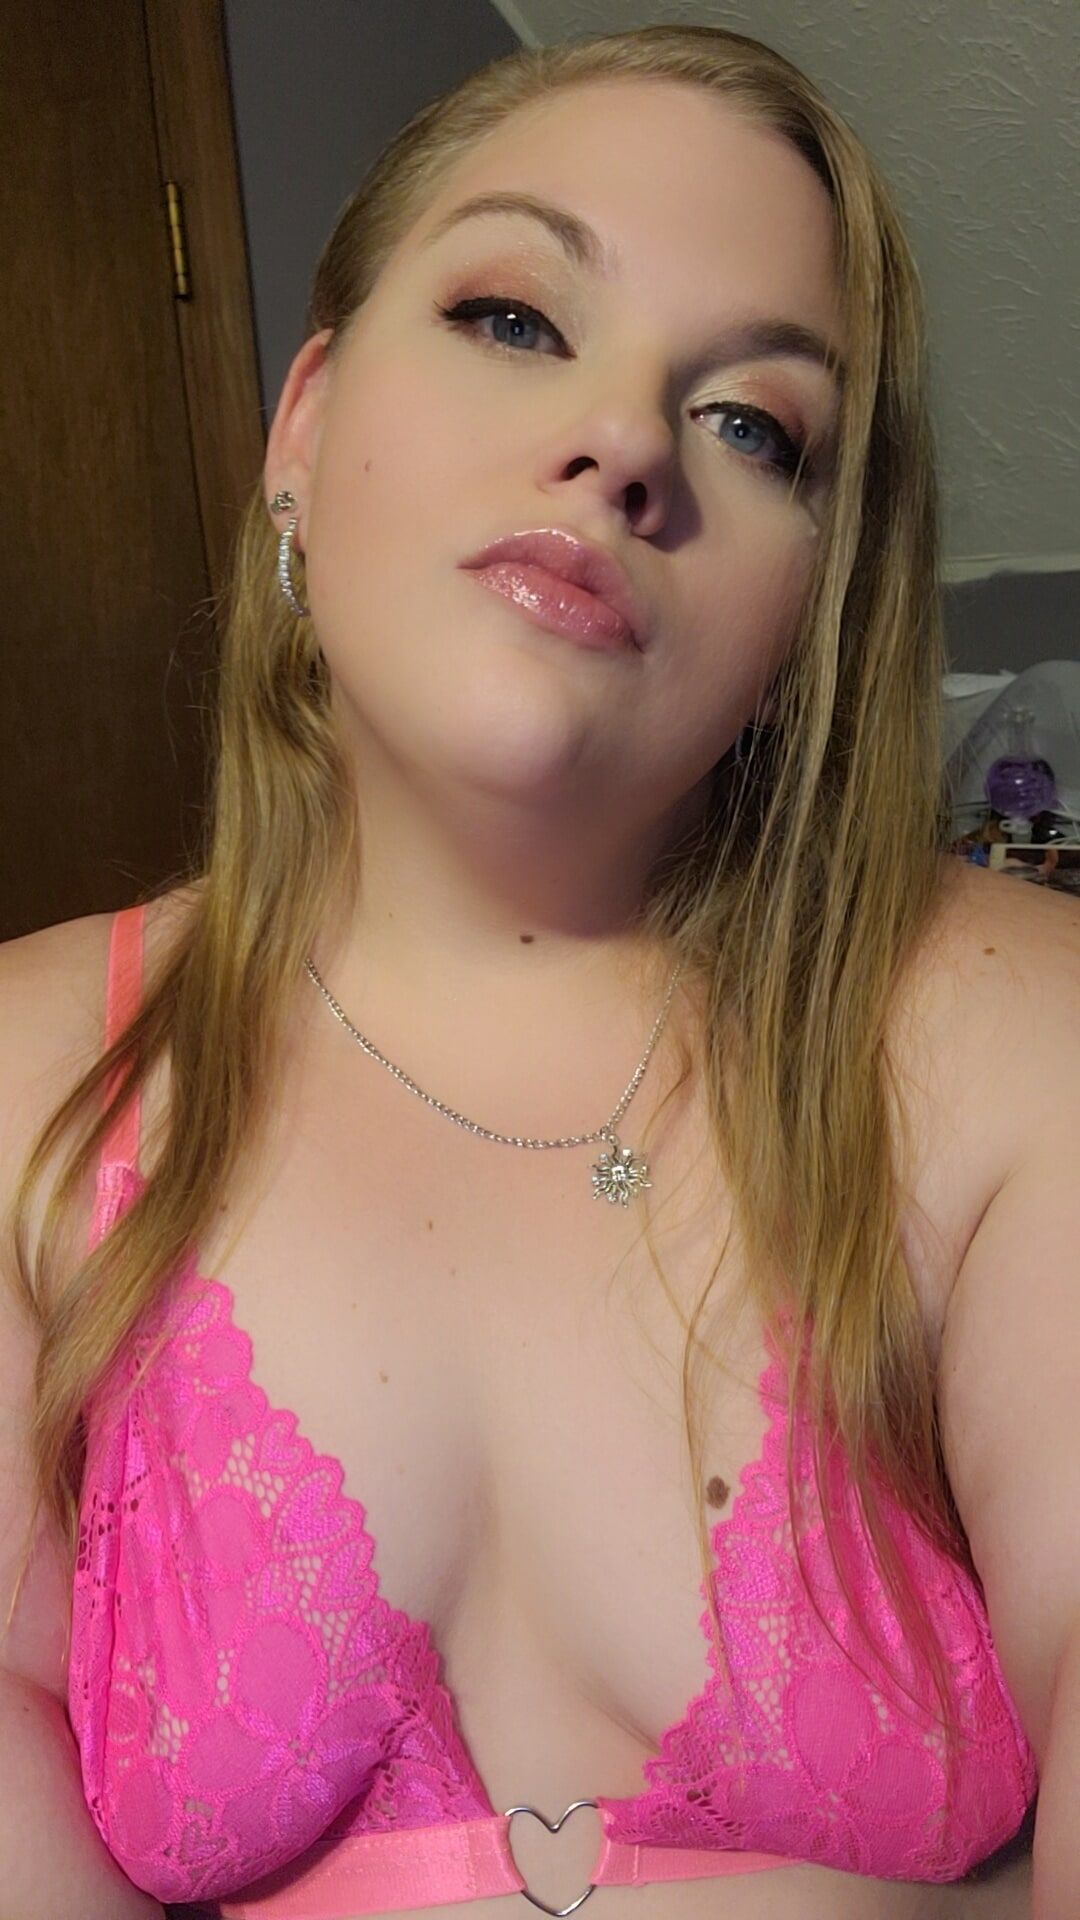 Sexy chubby barbie girl waiting for you #6